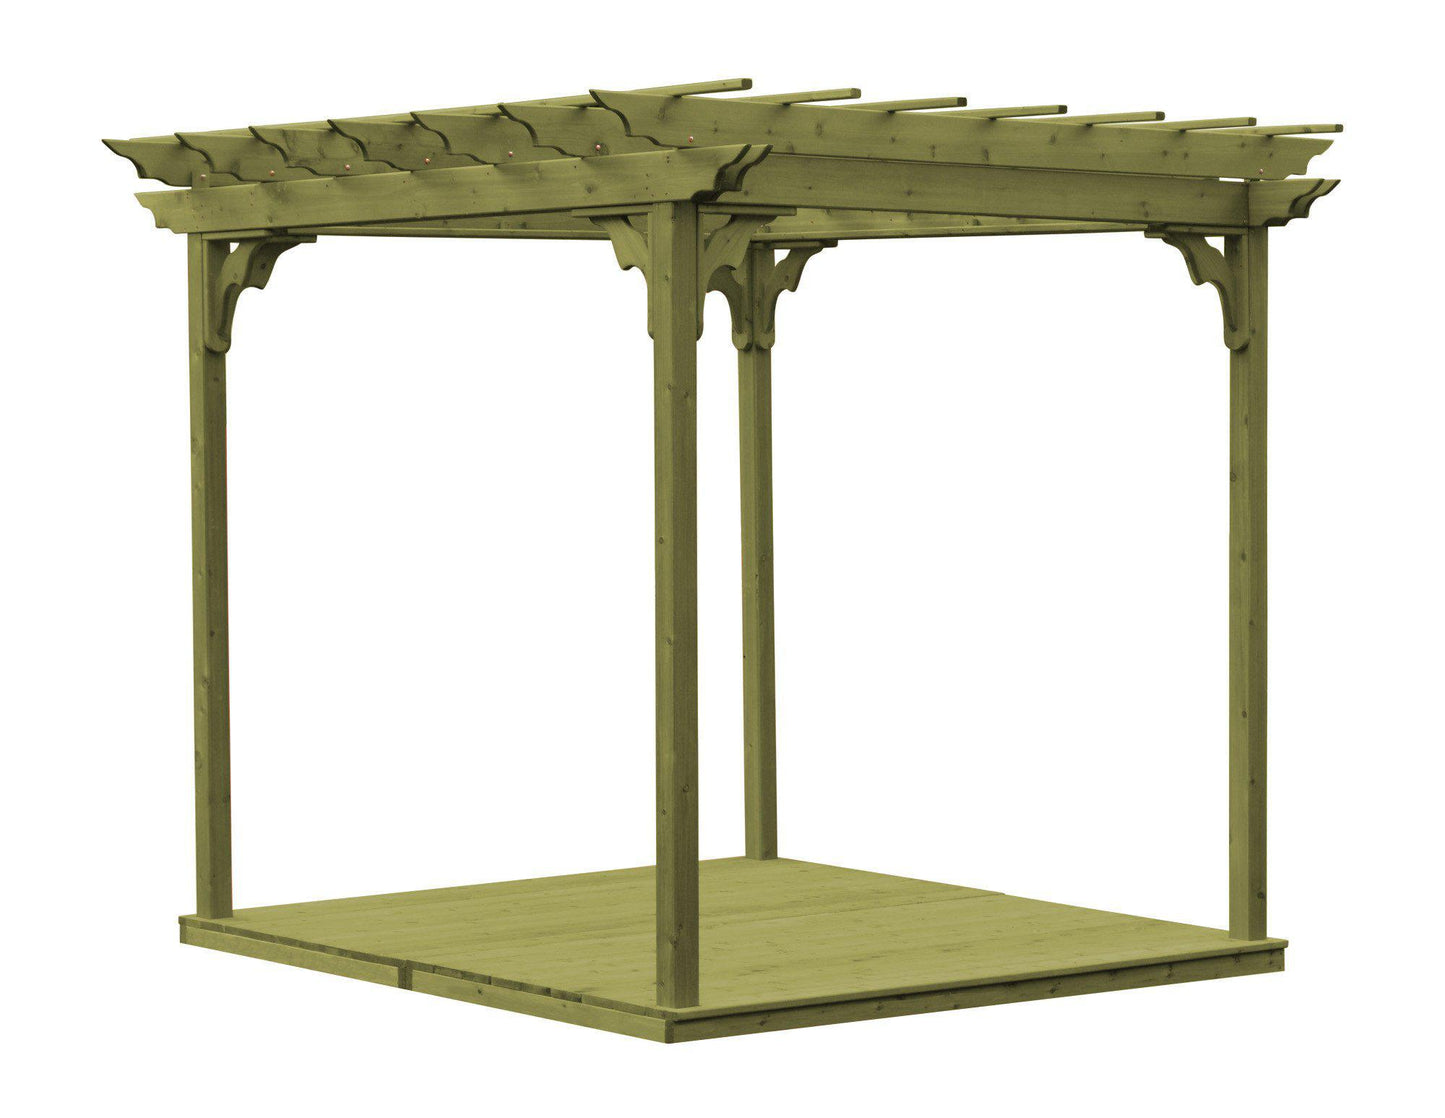 A&L FURNITURE CO. Western Red Cedar 8'x8' Pergola w/Deck & Swing Hangers (THIS ITEM HAS BEEN DISCONTINUED) - LEAD TIME TO SHIP 2 WEEKS